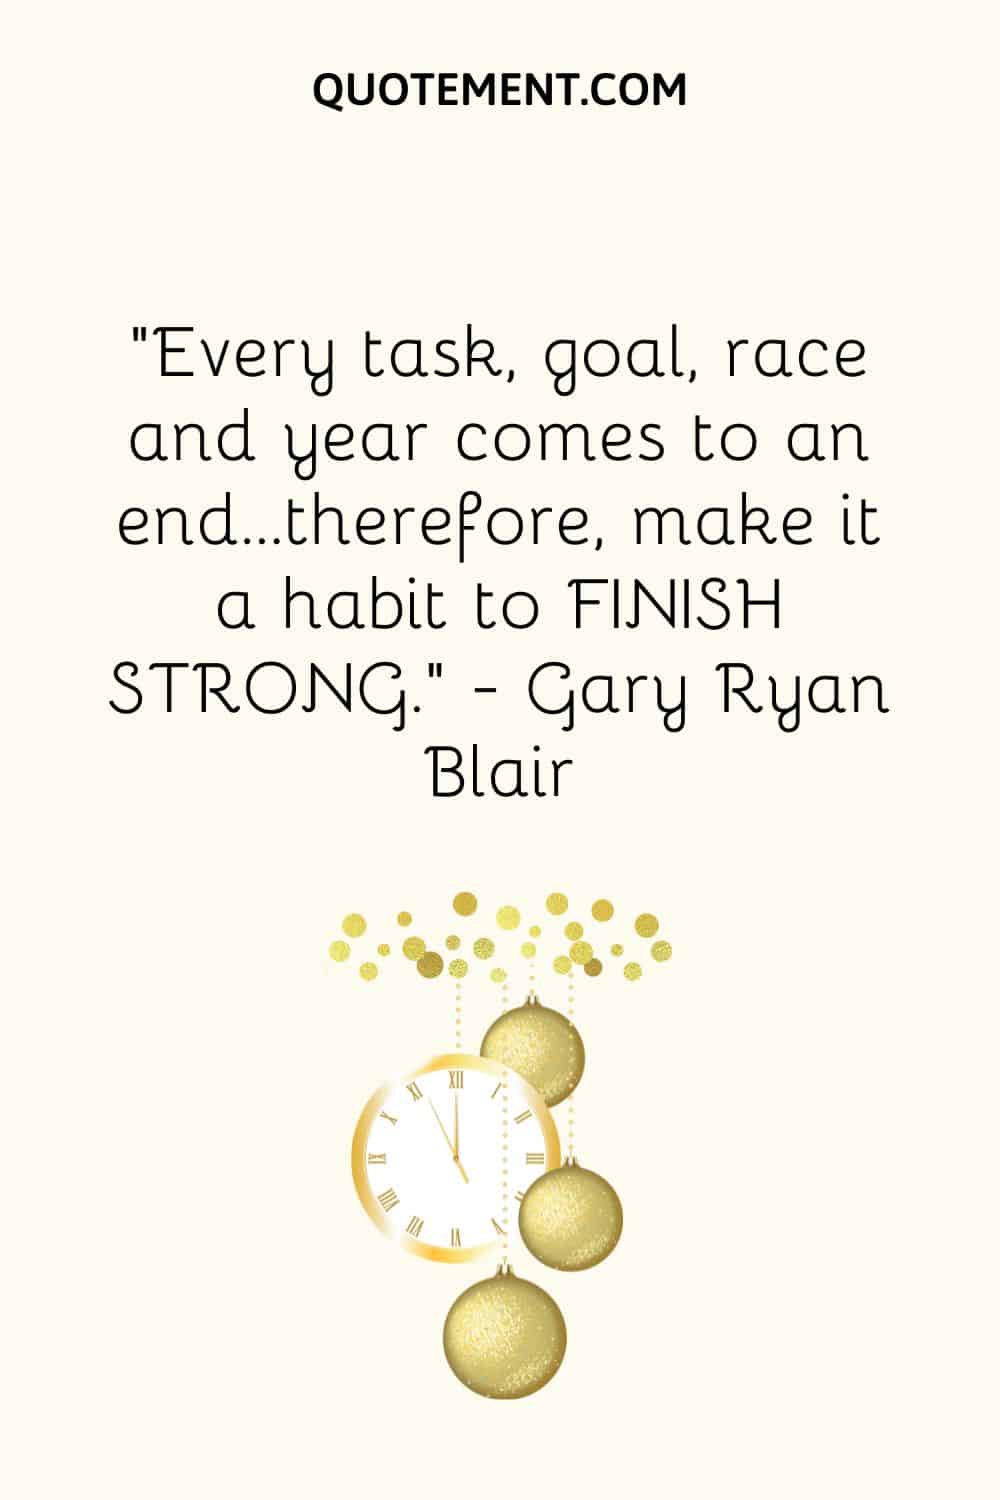 “Every task, goal, race and year comes to an end…therefore, make it a habit to FINISH STRONG.” ― Gary Ryan Blair